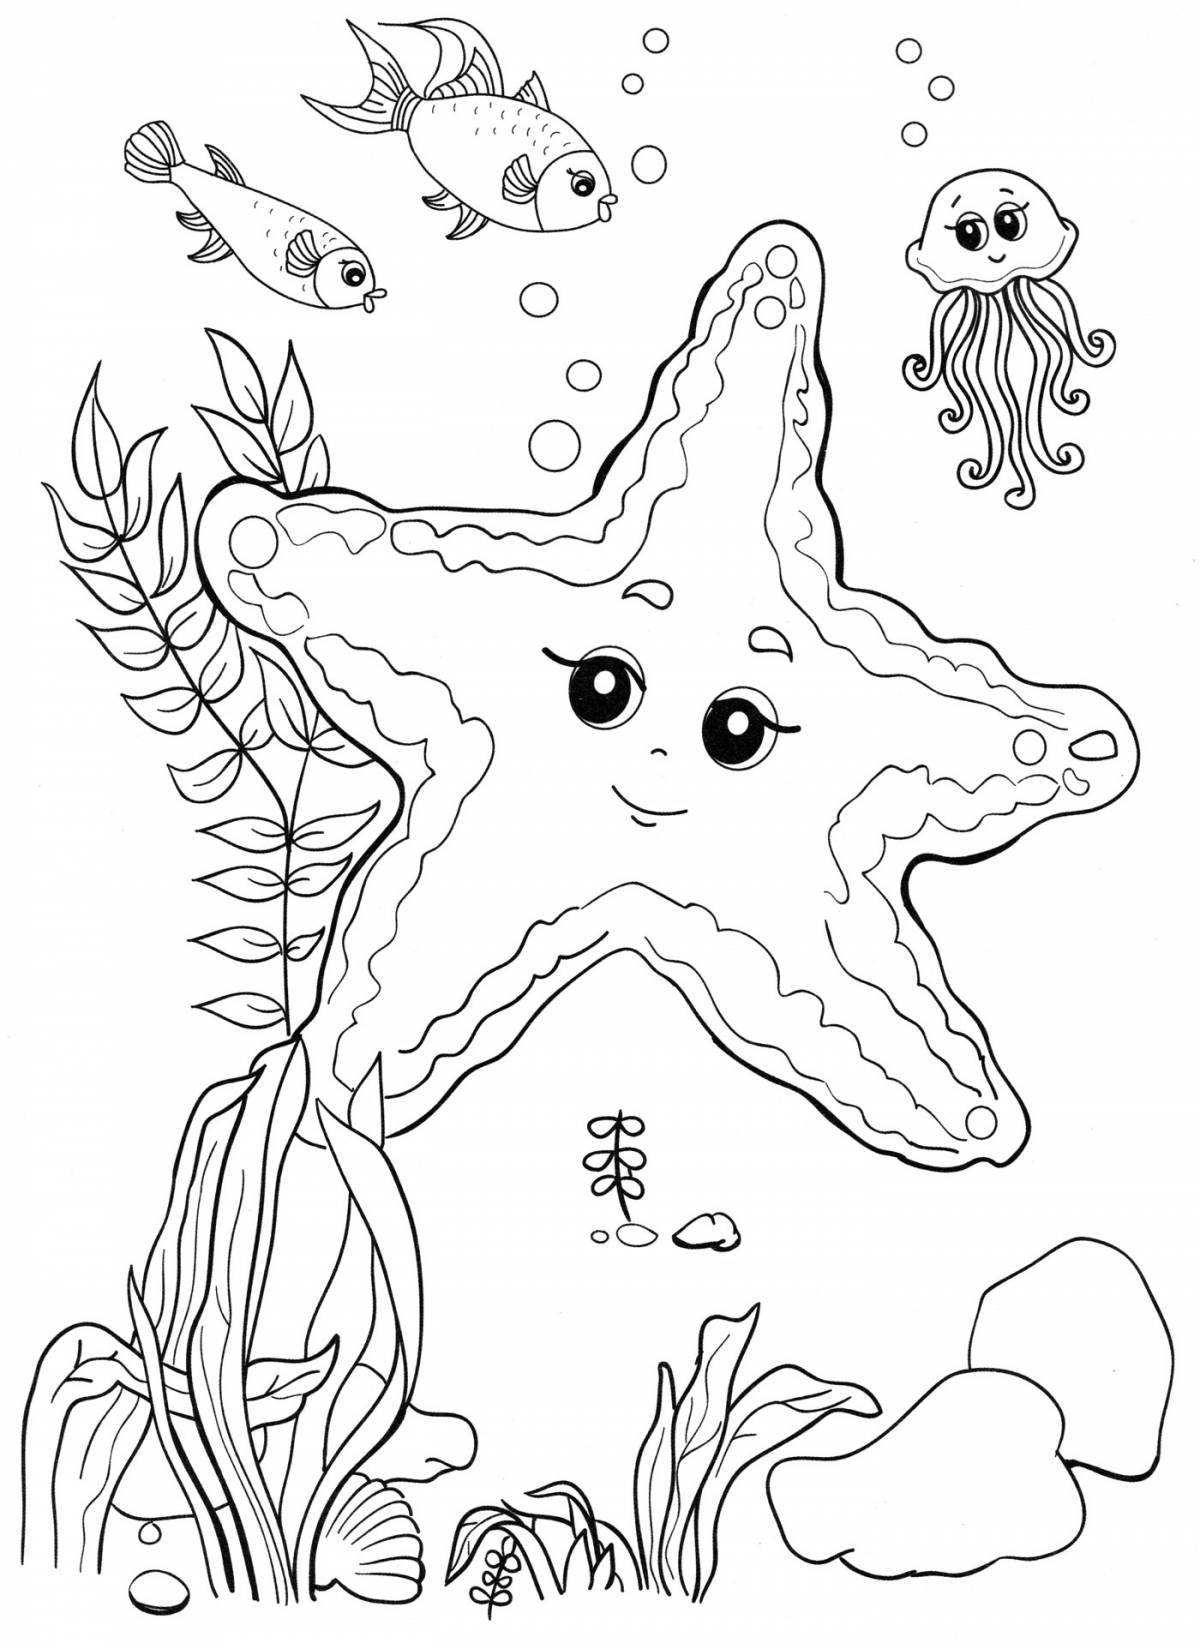 Fun marine life coloring pages for kids